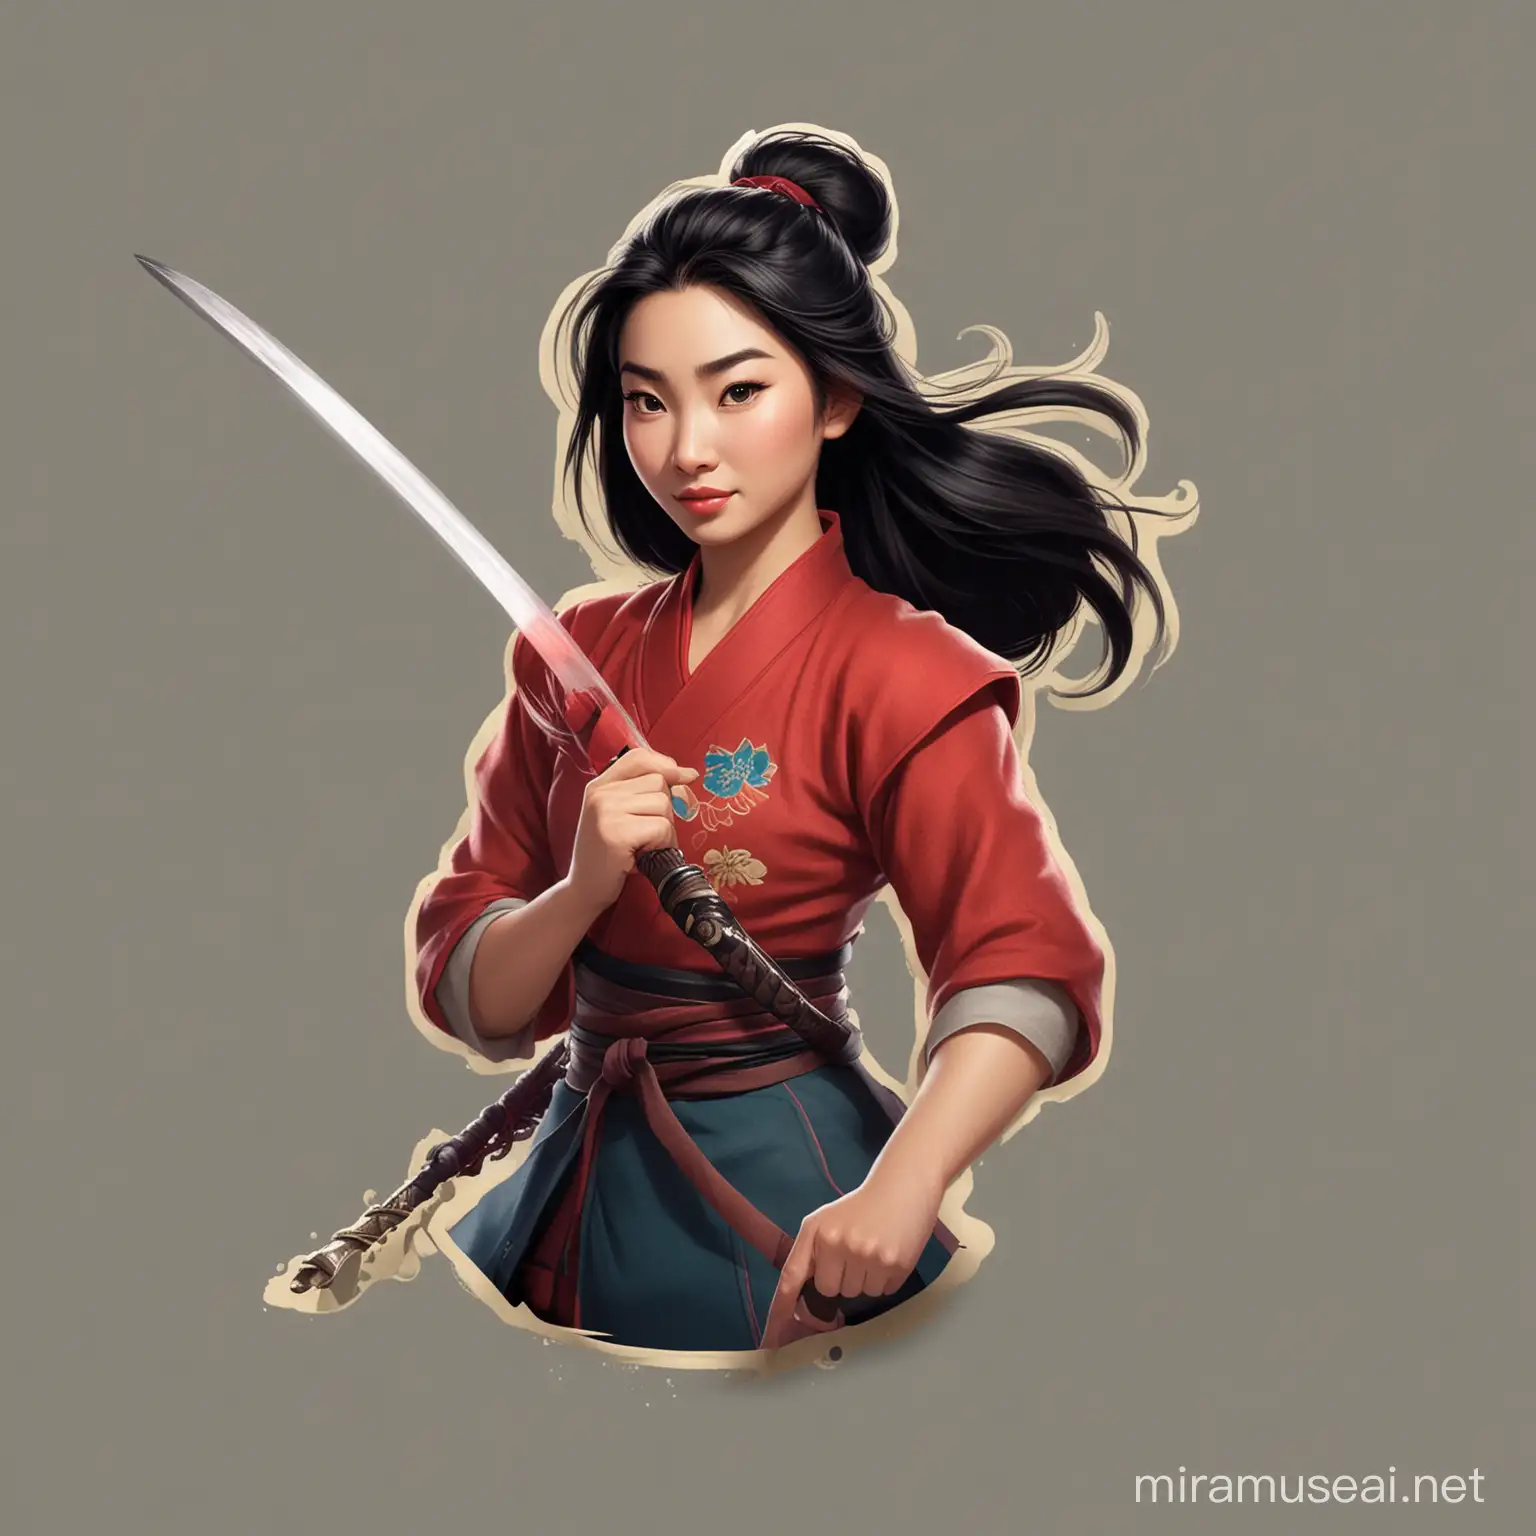 generate a sticker type image of Mulan with a sword